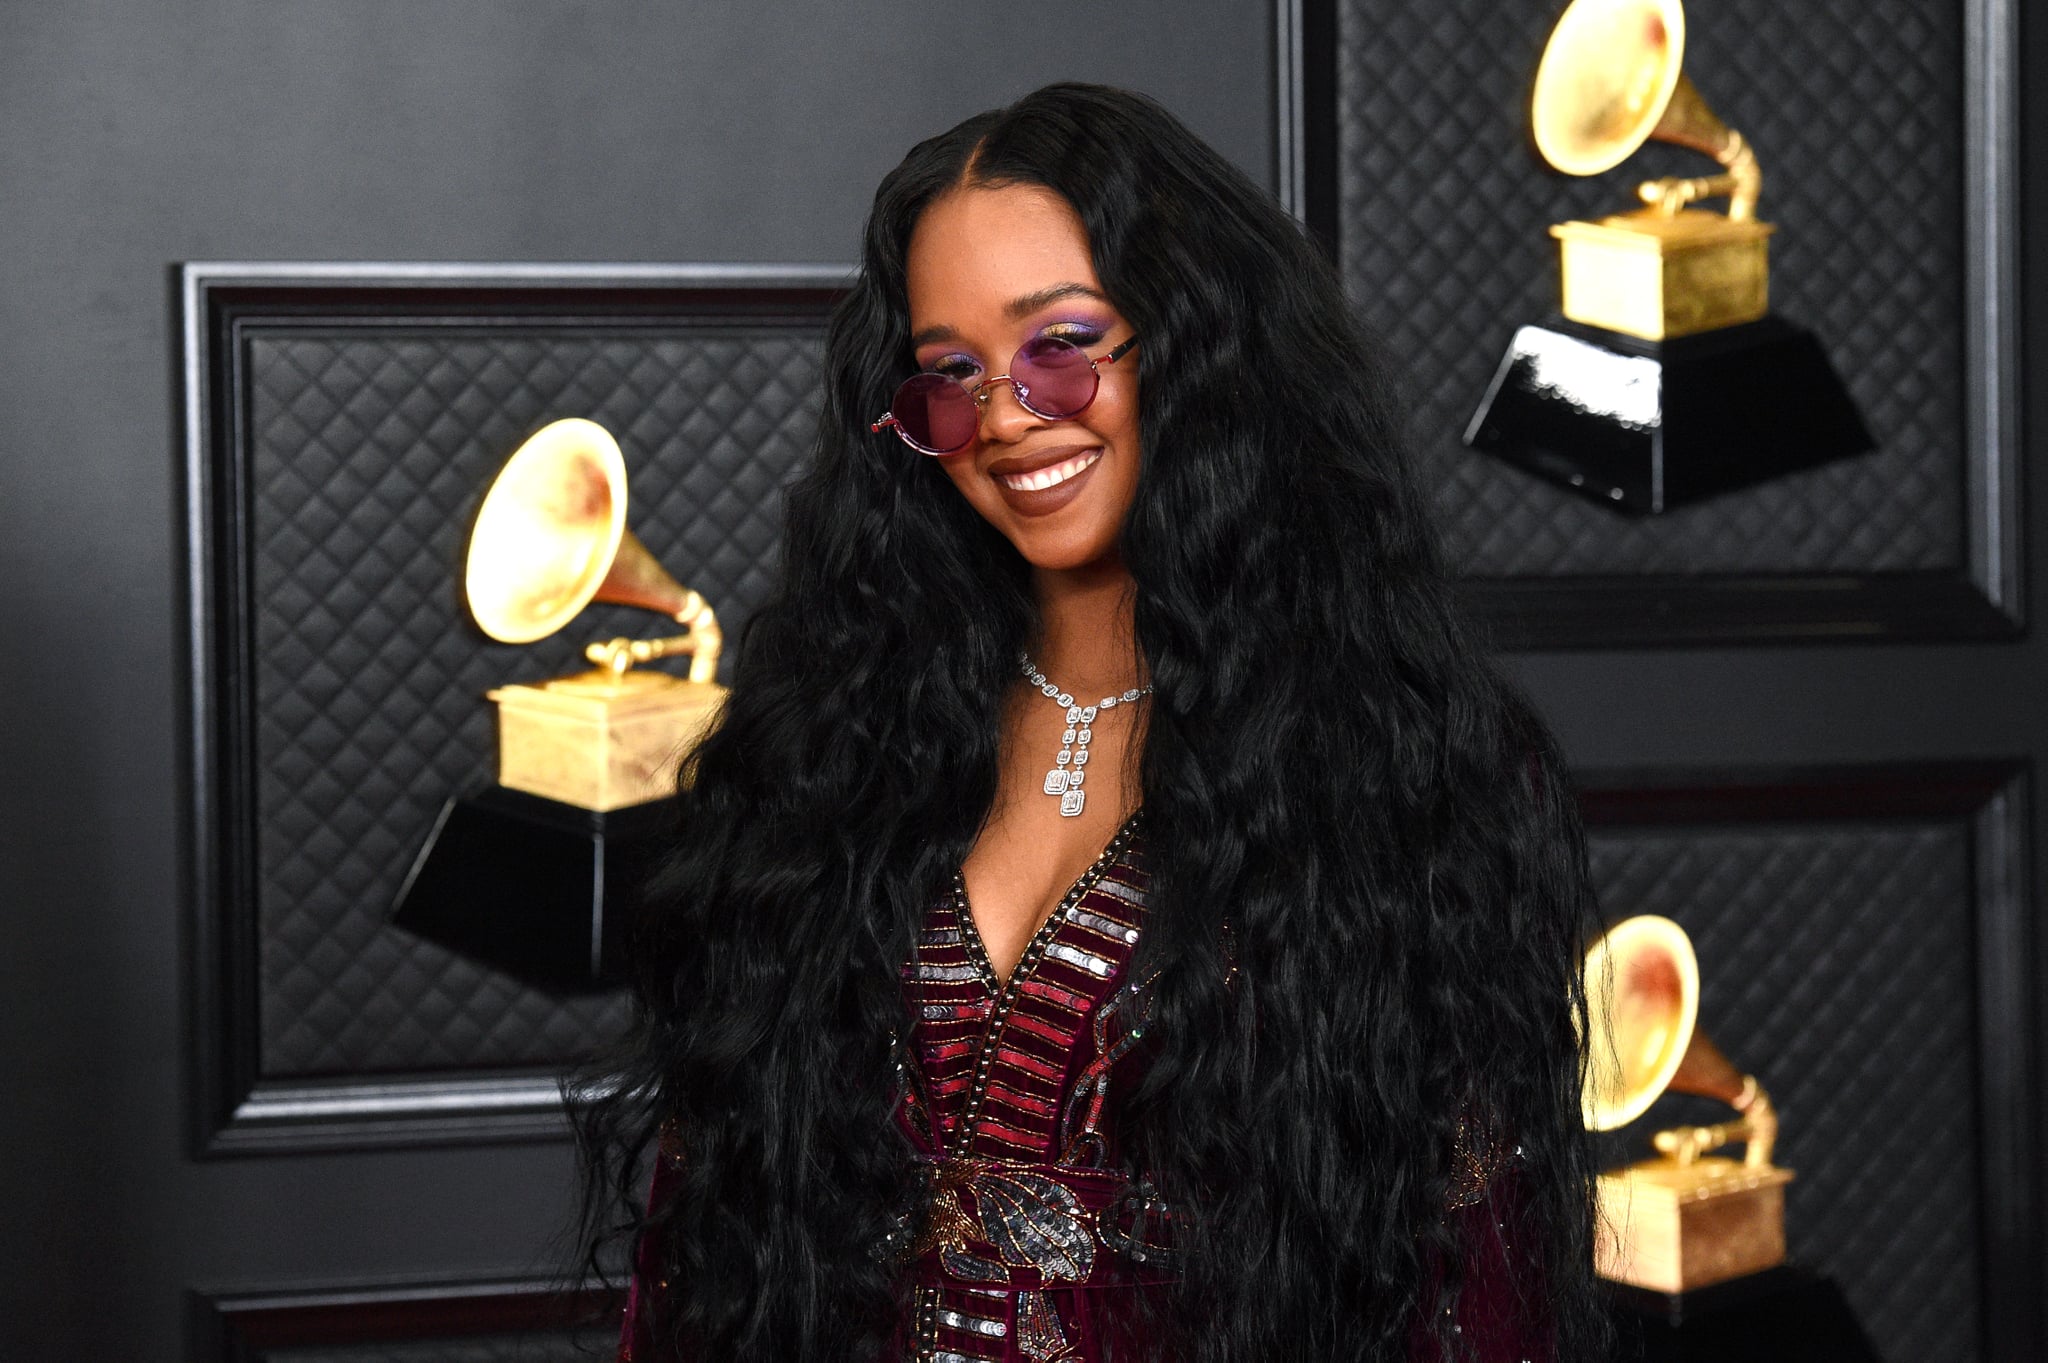 LOS ANGELES, CALIFORNIA - MARCH 14: H.E.R. attends the 63rd Annual GRAMMY Awards at Los Angeles Convention Center on March 14, 2021 in Los Angeles, California. (Photo by Kevin Mazur/Getty Images for The Recording Academy )